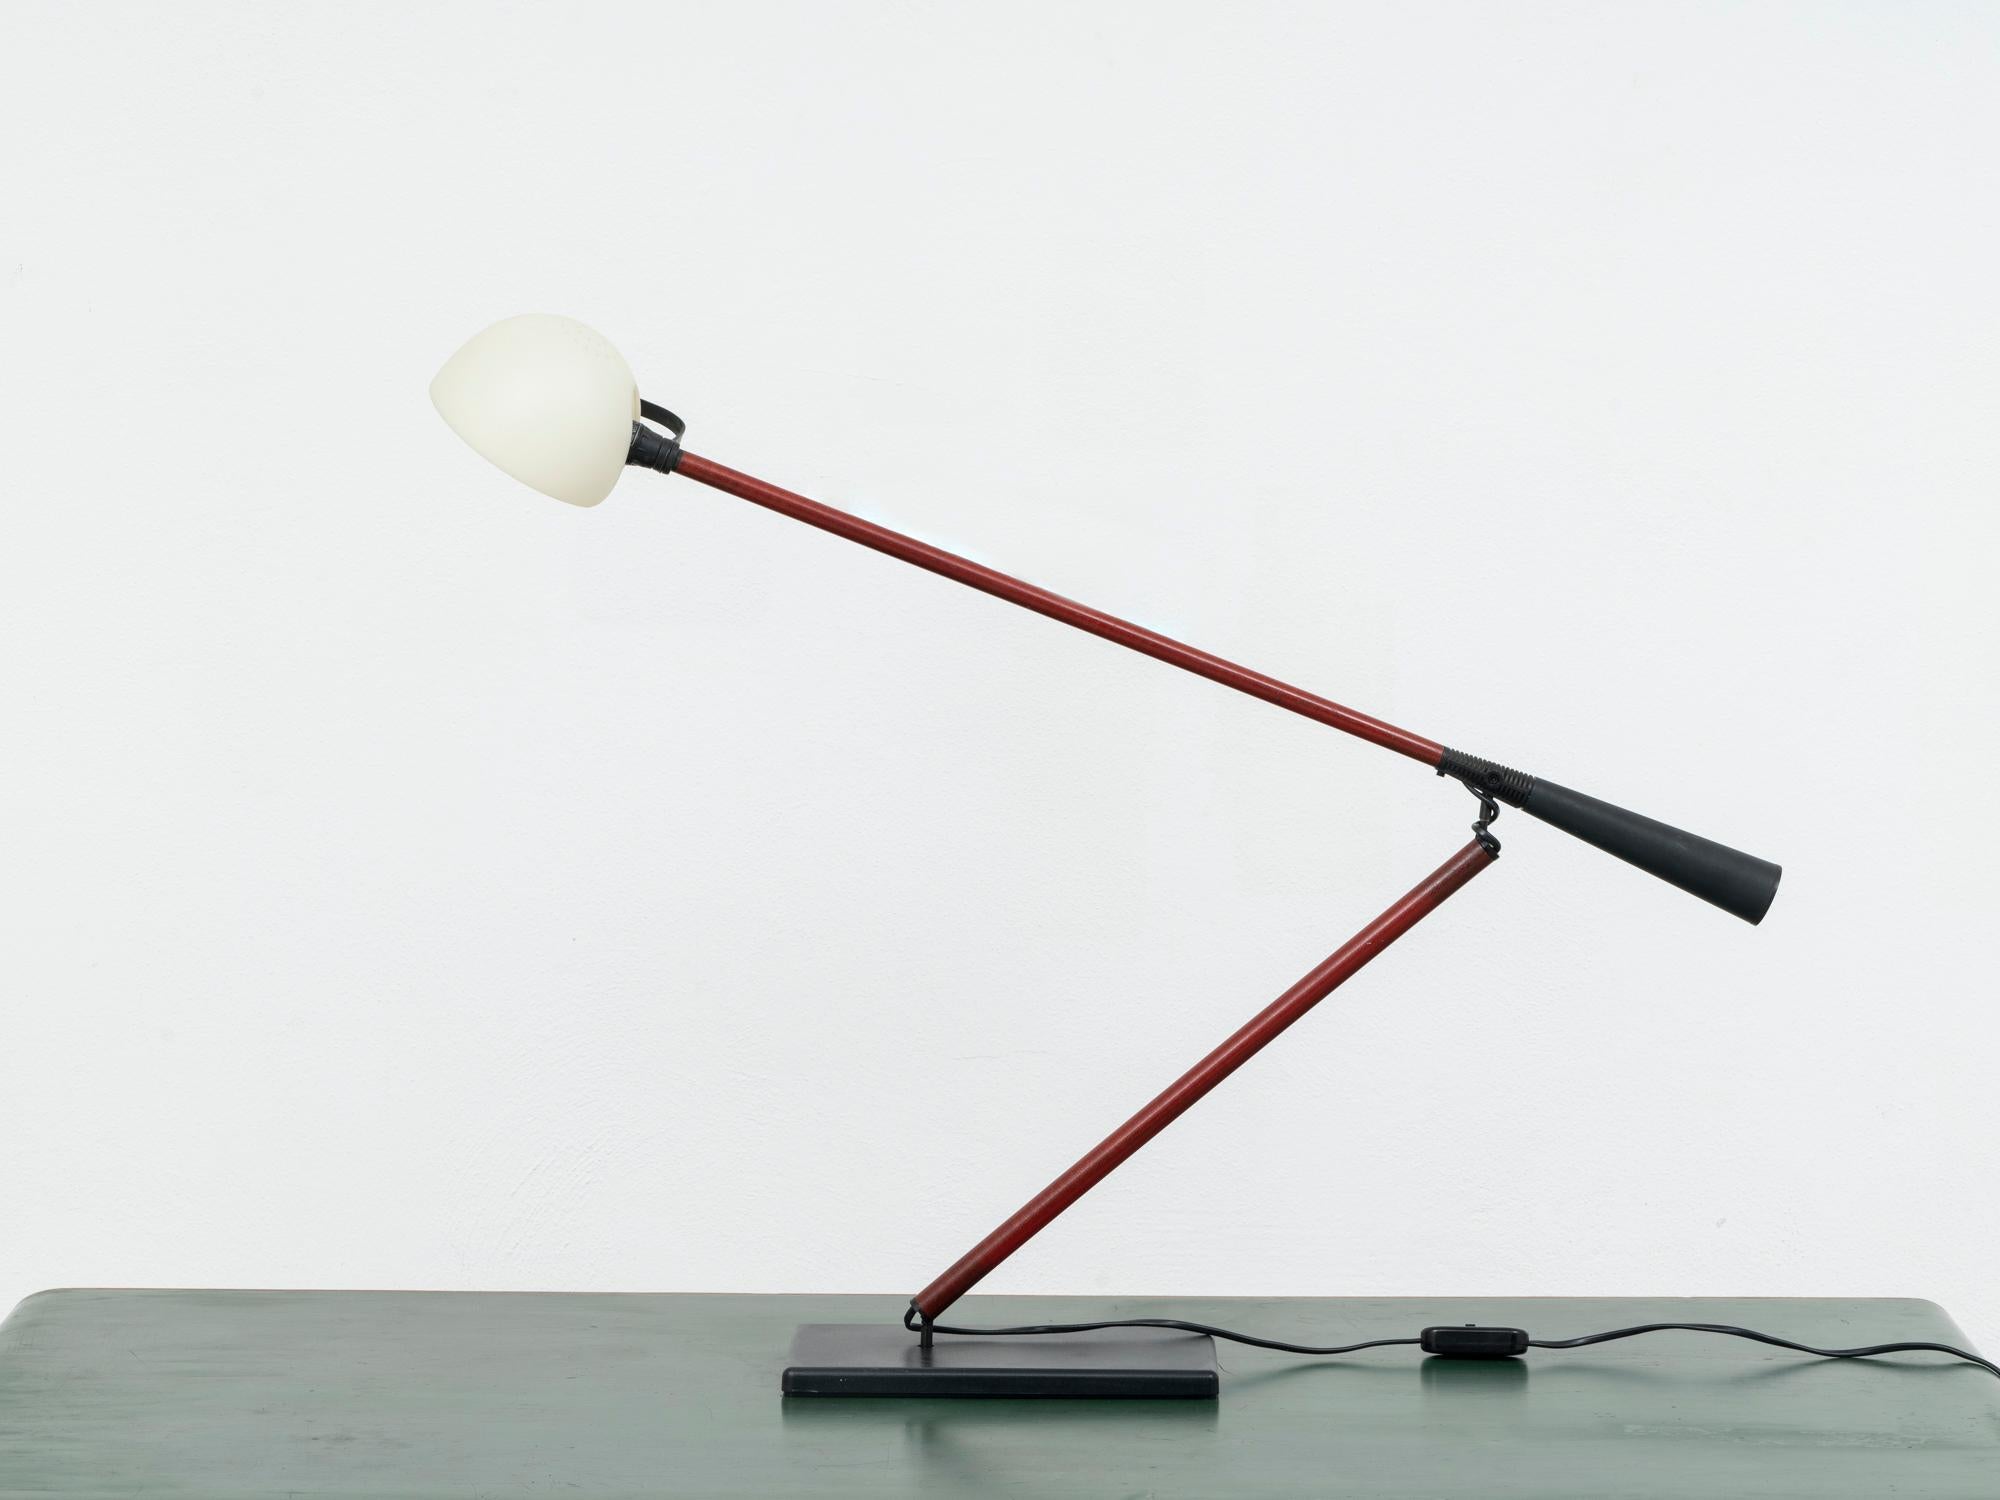 This lamp was designed by Italian architect and designer Paolo Rizzatto in 1975, and was his second project, the table version of the 265 wall lamp. This lamp was conceived to cover the whole area of any desk and to be extremely light (therefore the